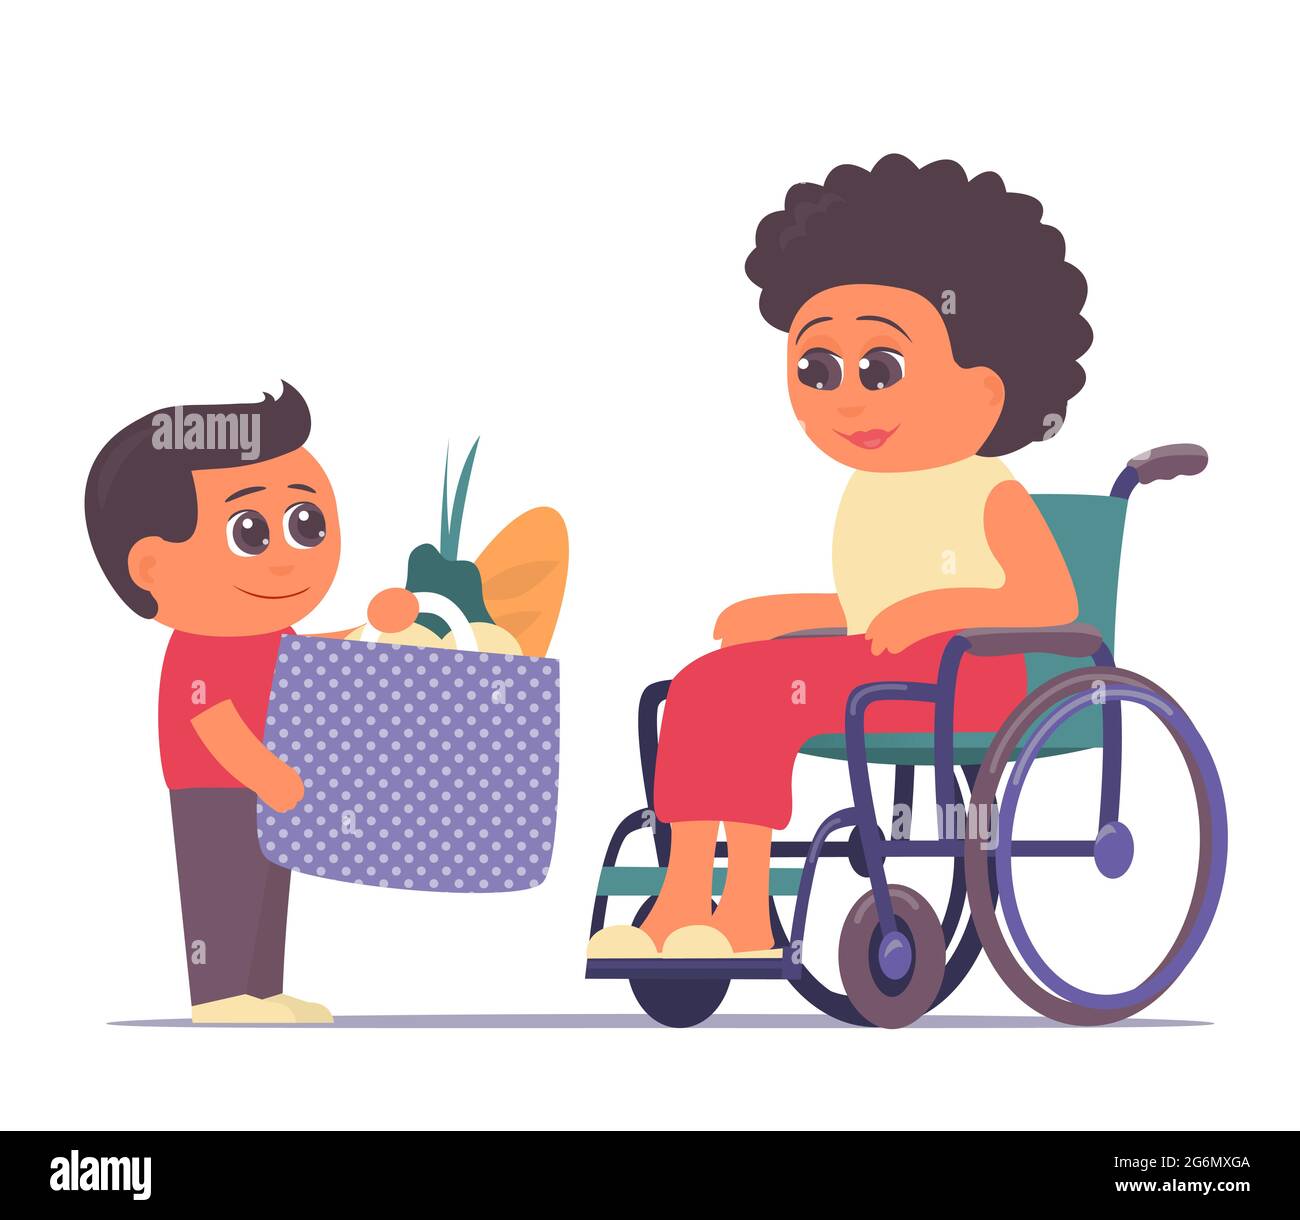 A little grandson brought food to his grandmother in a wheelchair. Caring for and helping the elderly. Family values. Vector isolated cartoon illustra Stock Vector